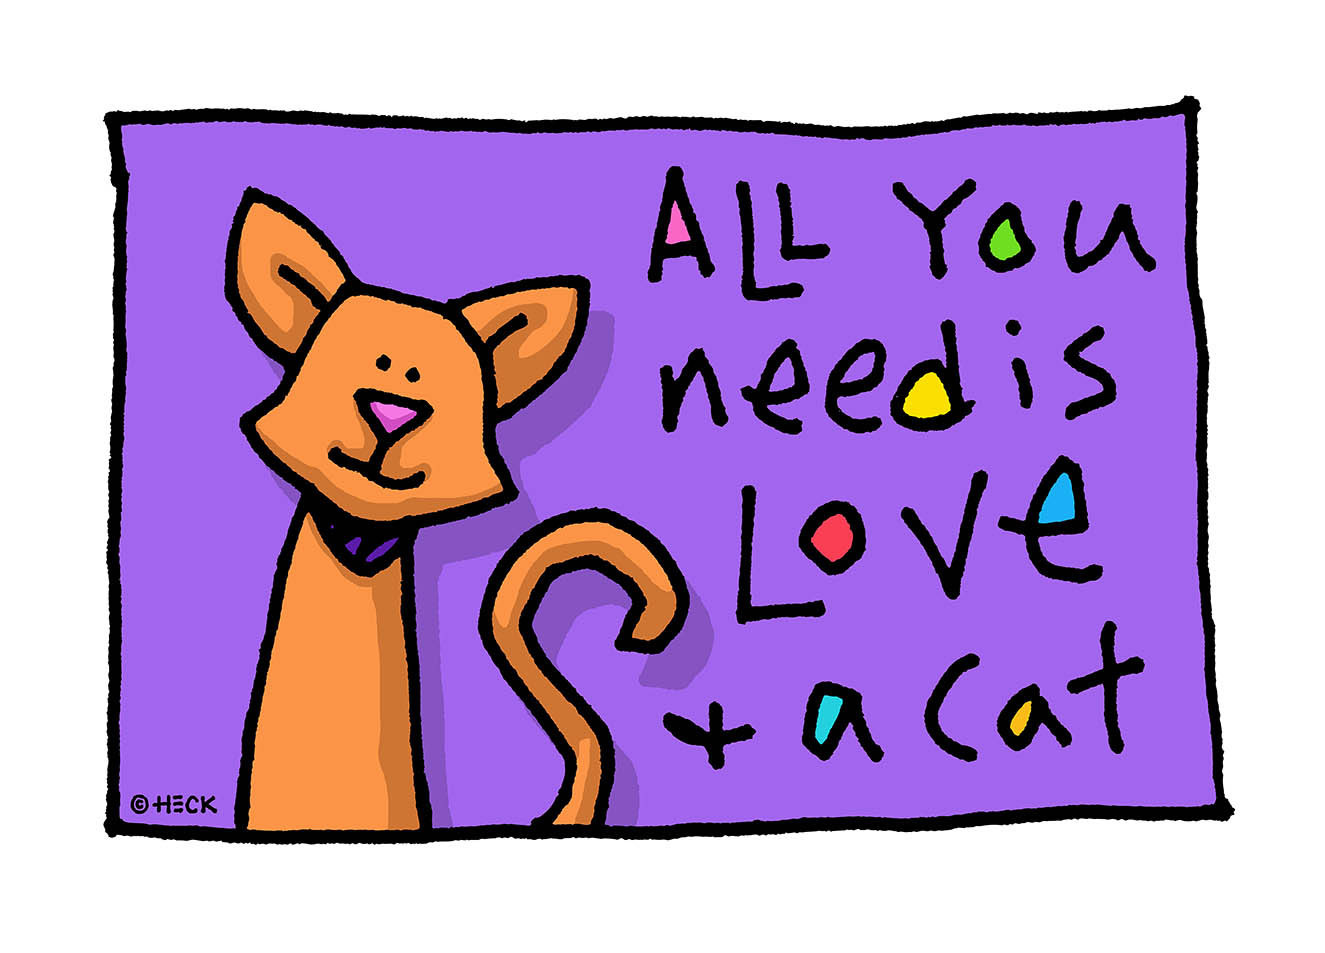 Ed Heck - All you need is love and a cat